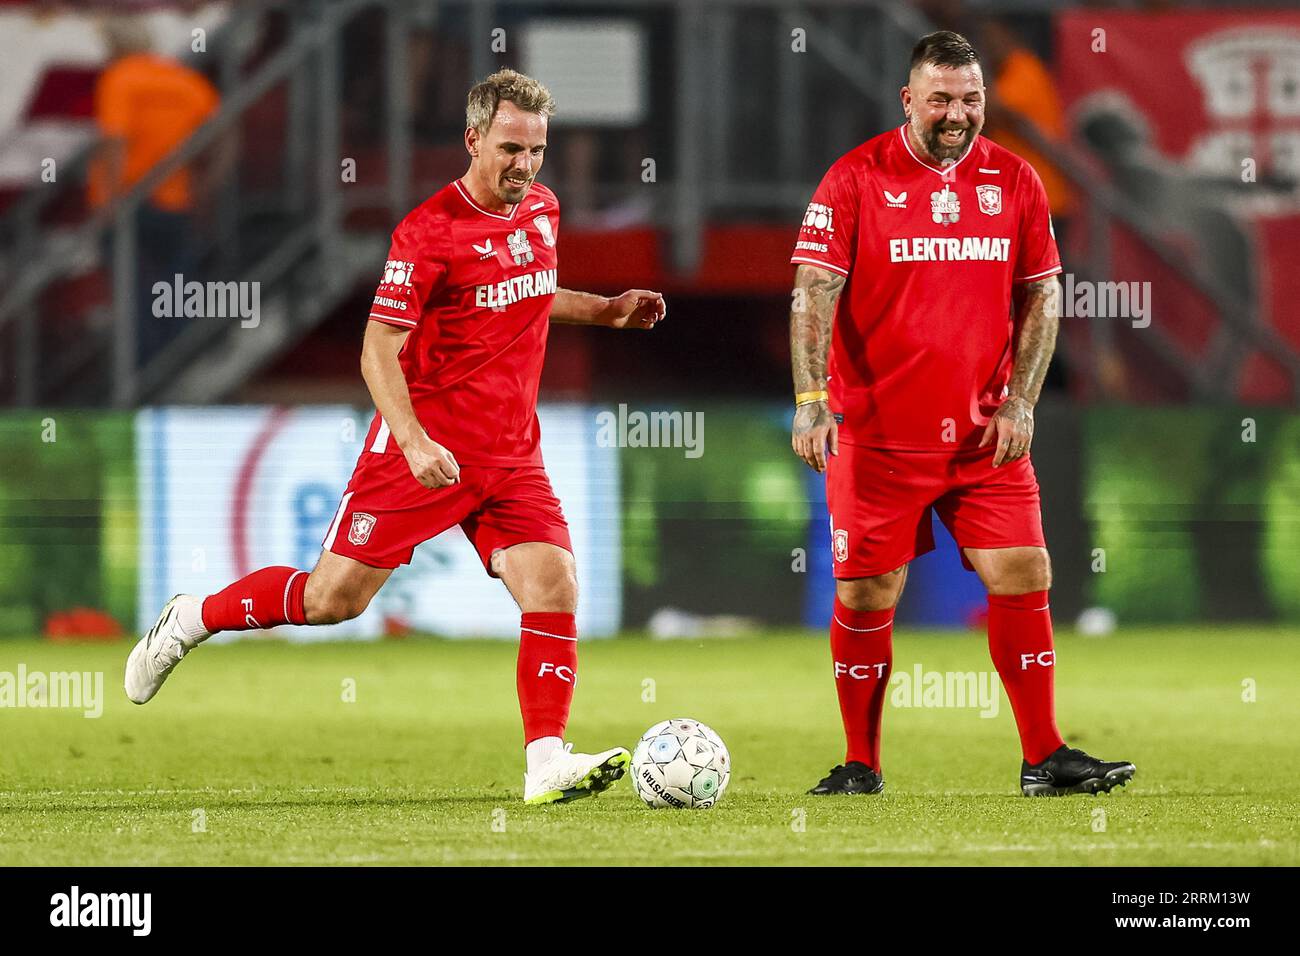 ENSCHEDE - Wout Brama, Theo Janssen (lr) during Wout Brama's farewell match  in De Grolsch Veste. Brama played fifteen seasons and almost four hundred  matches in the shirt of FC Twente. For